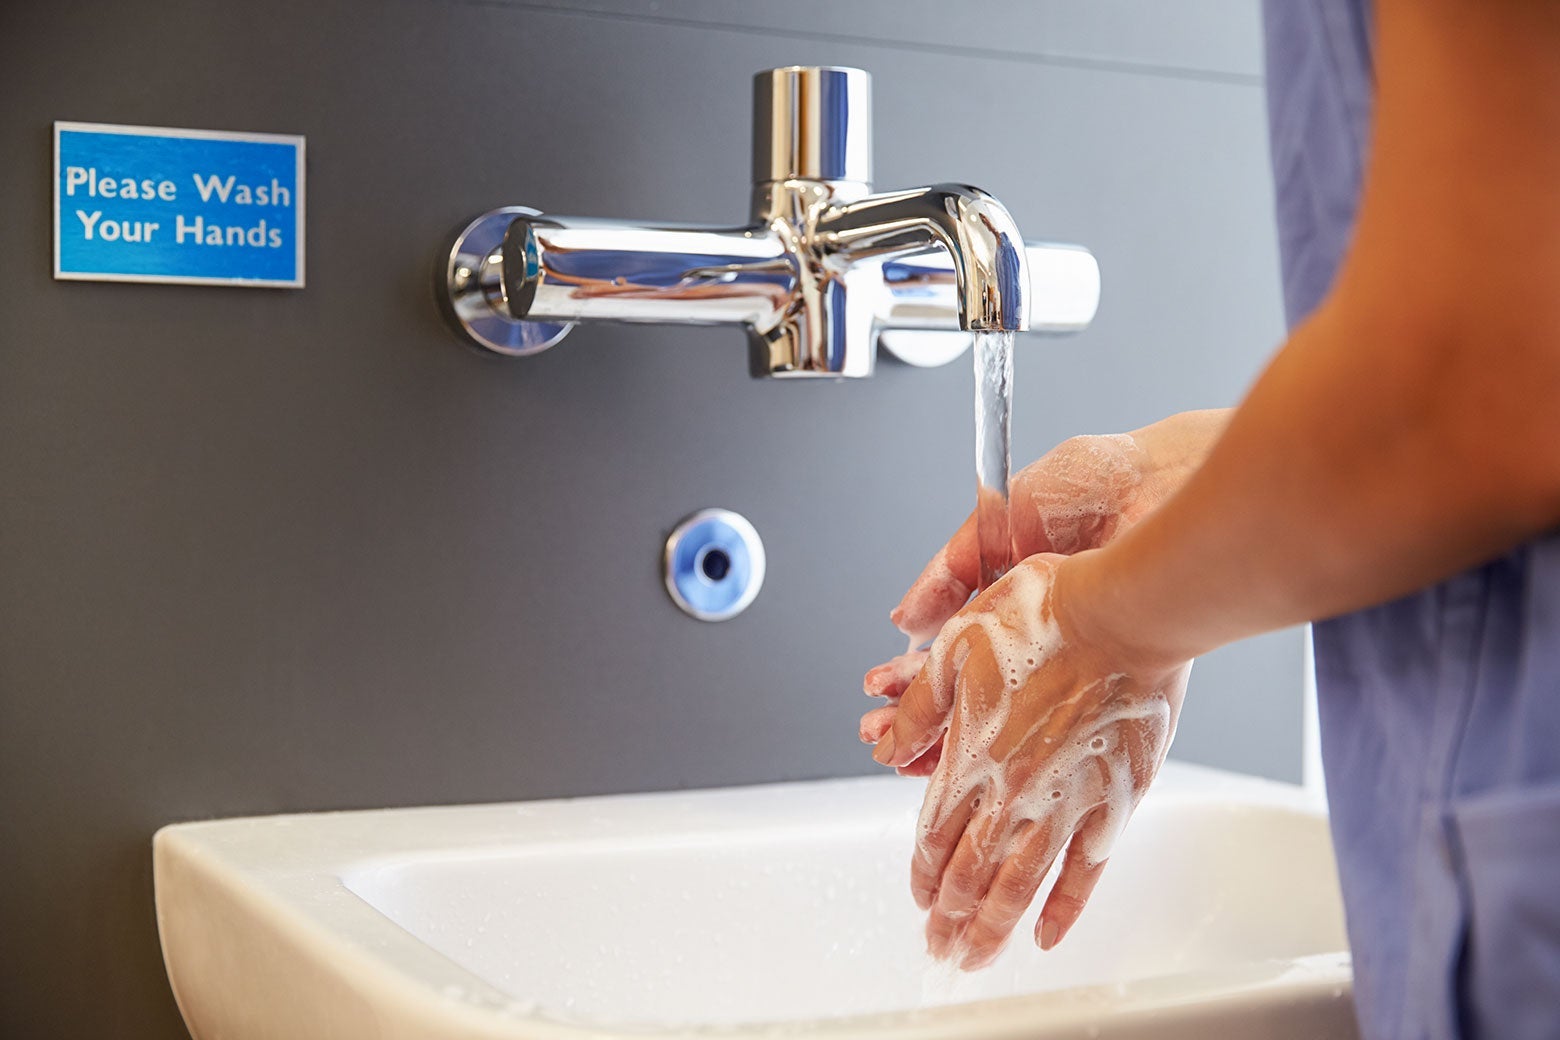 A nurse washing their hands in a sink next to a sign that says "Please wash your hands."